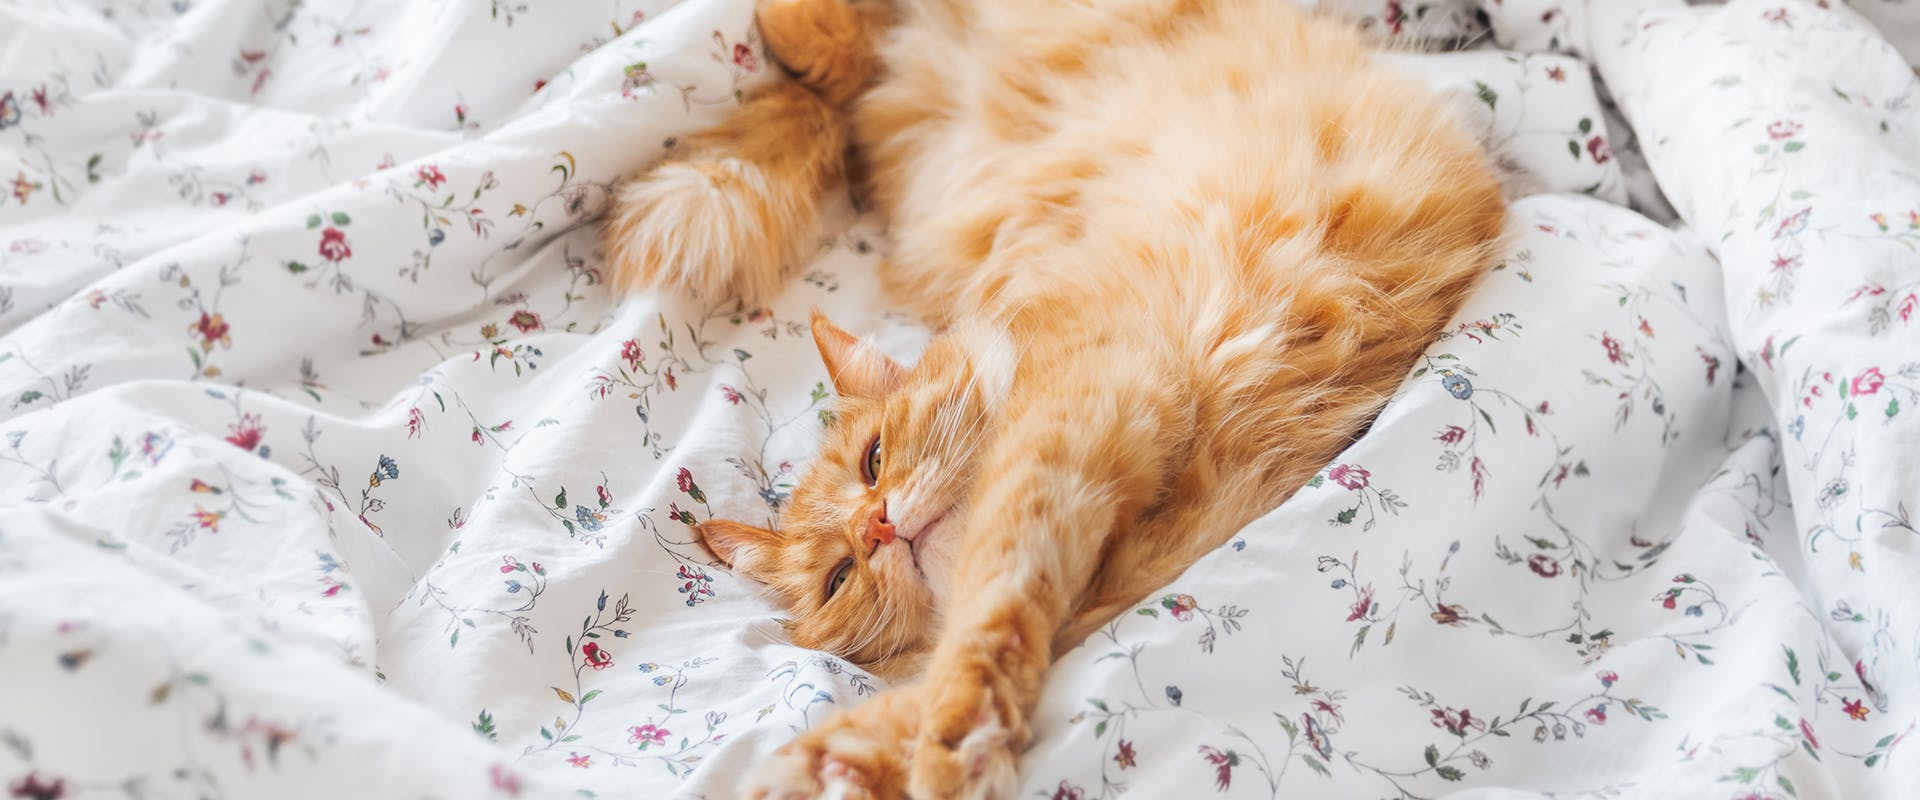 A sleepy cat outstretched on a bed